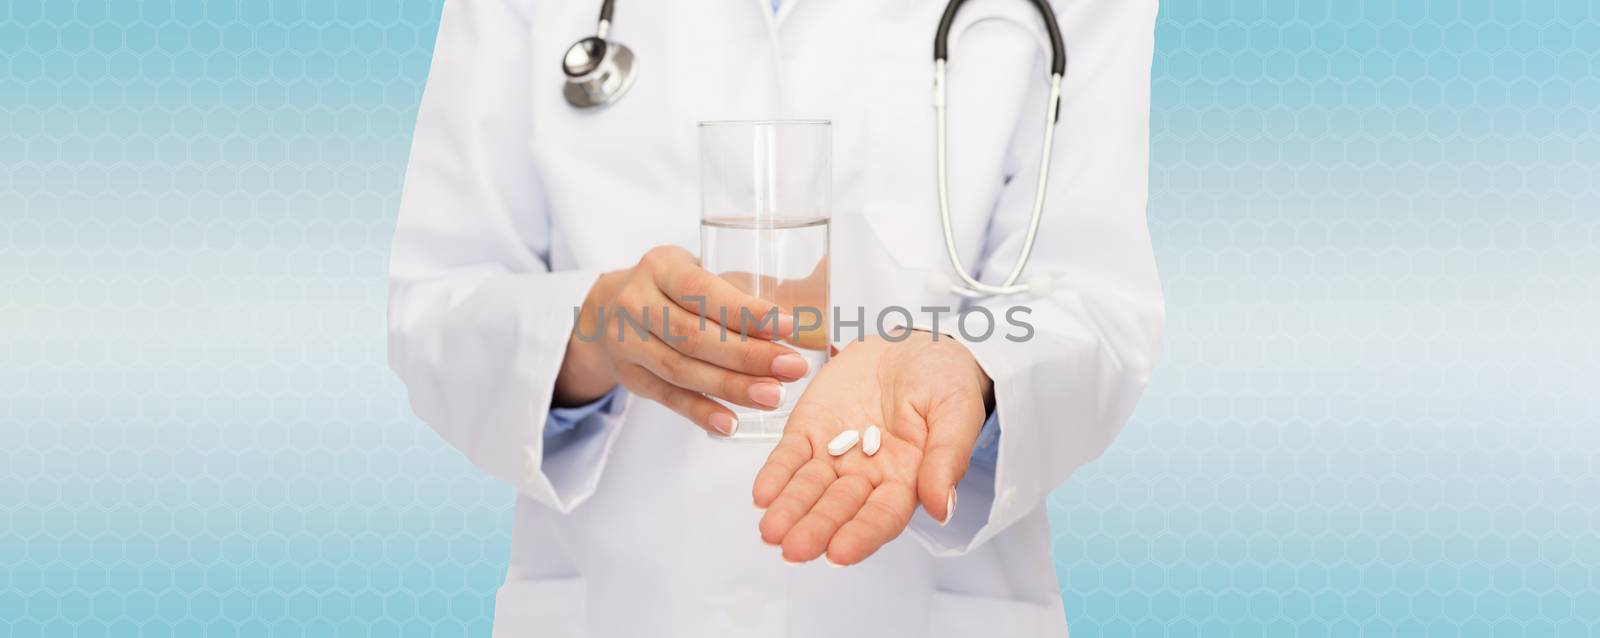 healthcare, medicine, people and pharmacy concept - close up of doctor with stethoscope offering pills and water over blue background